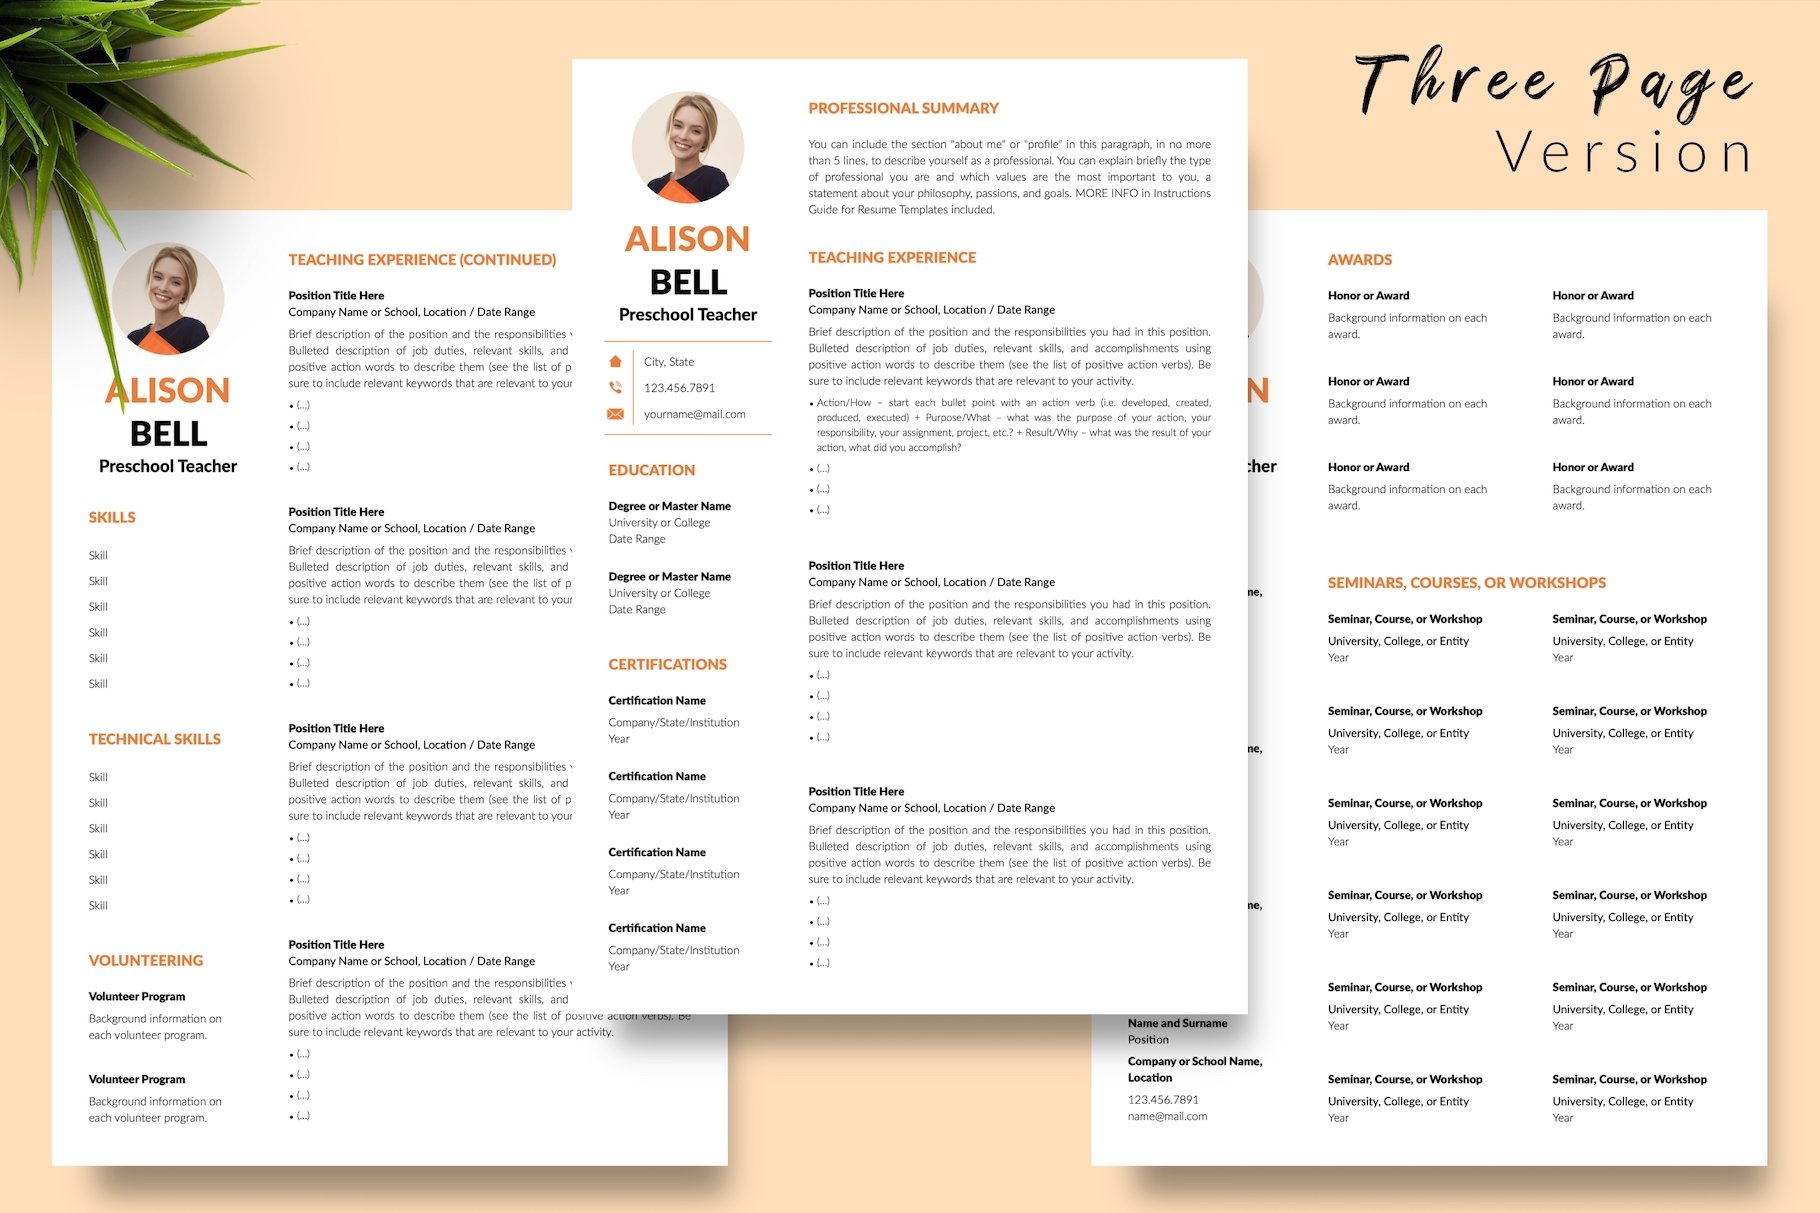 resume cv template alison bell for creative market 04 three page version 185